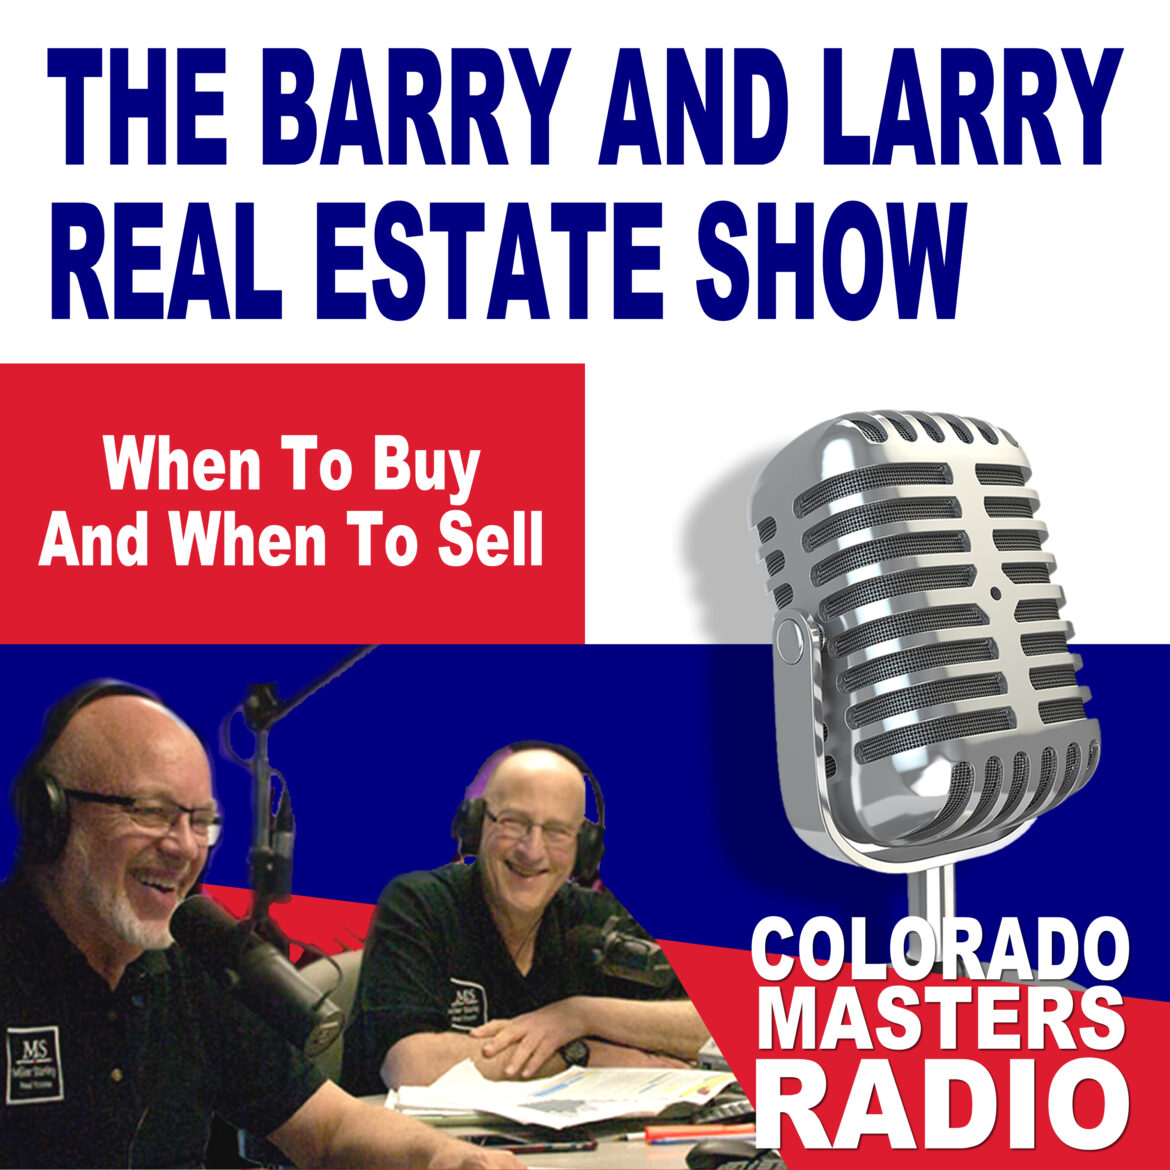 The Larry and Barry Real Estate Show - When To Buy And When To Sell